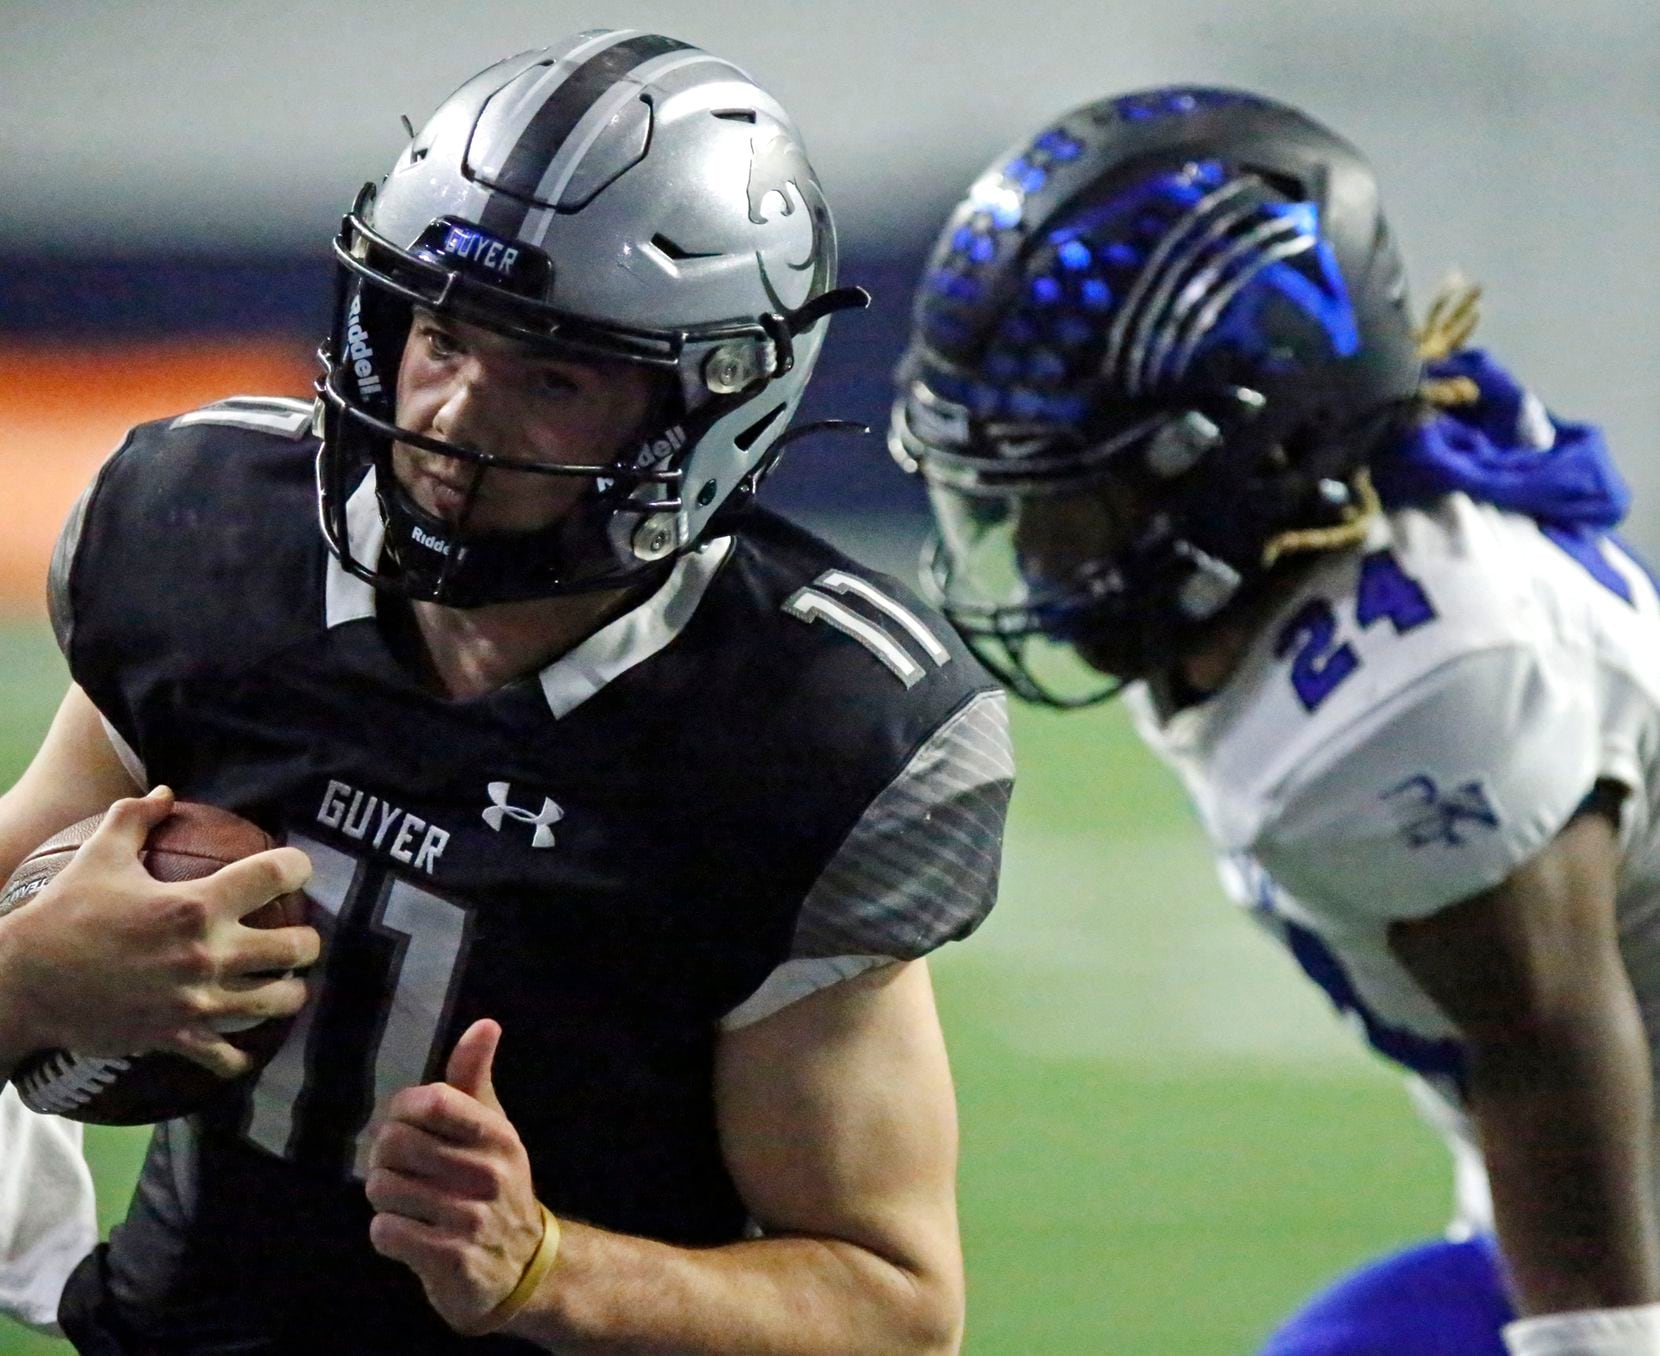 Guyer High School quarterback Jackson Arnold (11) outruns Byron Nelson High School defensive back Chauncey Mcgriff (24) for a touchdown during the first half as Denton Guyer High School played Trophy Club Byron Nelson High School in a Class 6A Division II Region I semifinal football game at The Ford Center in Frisco on Saturday, November 27, 2021. (Stewart F. House/Special Contributor)